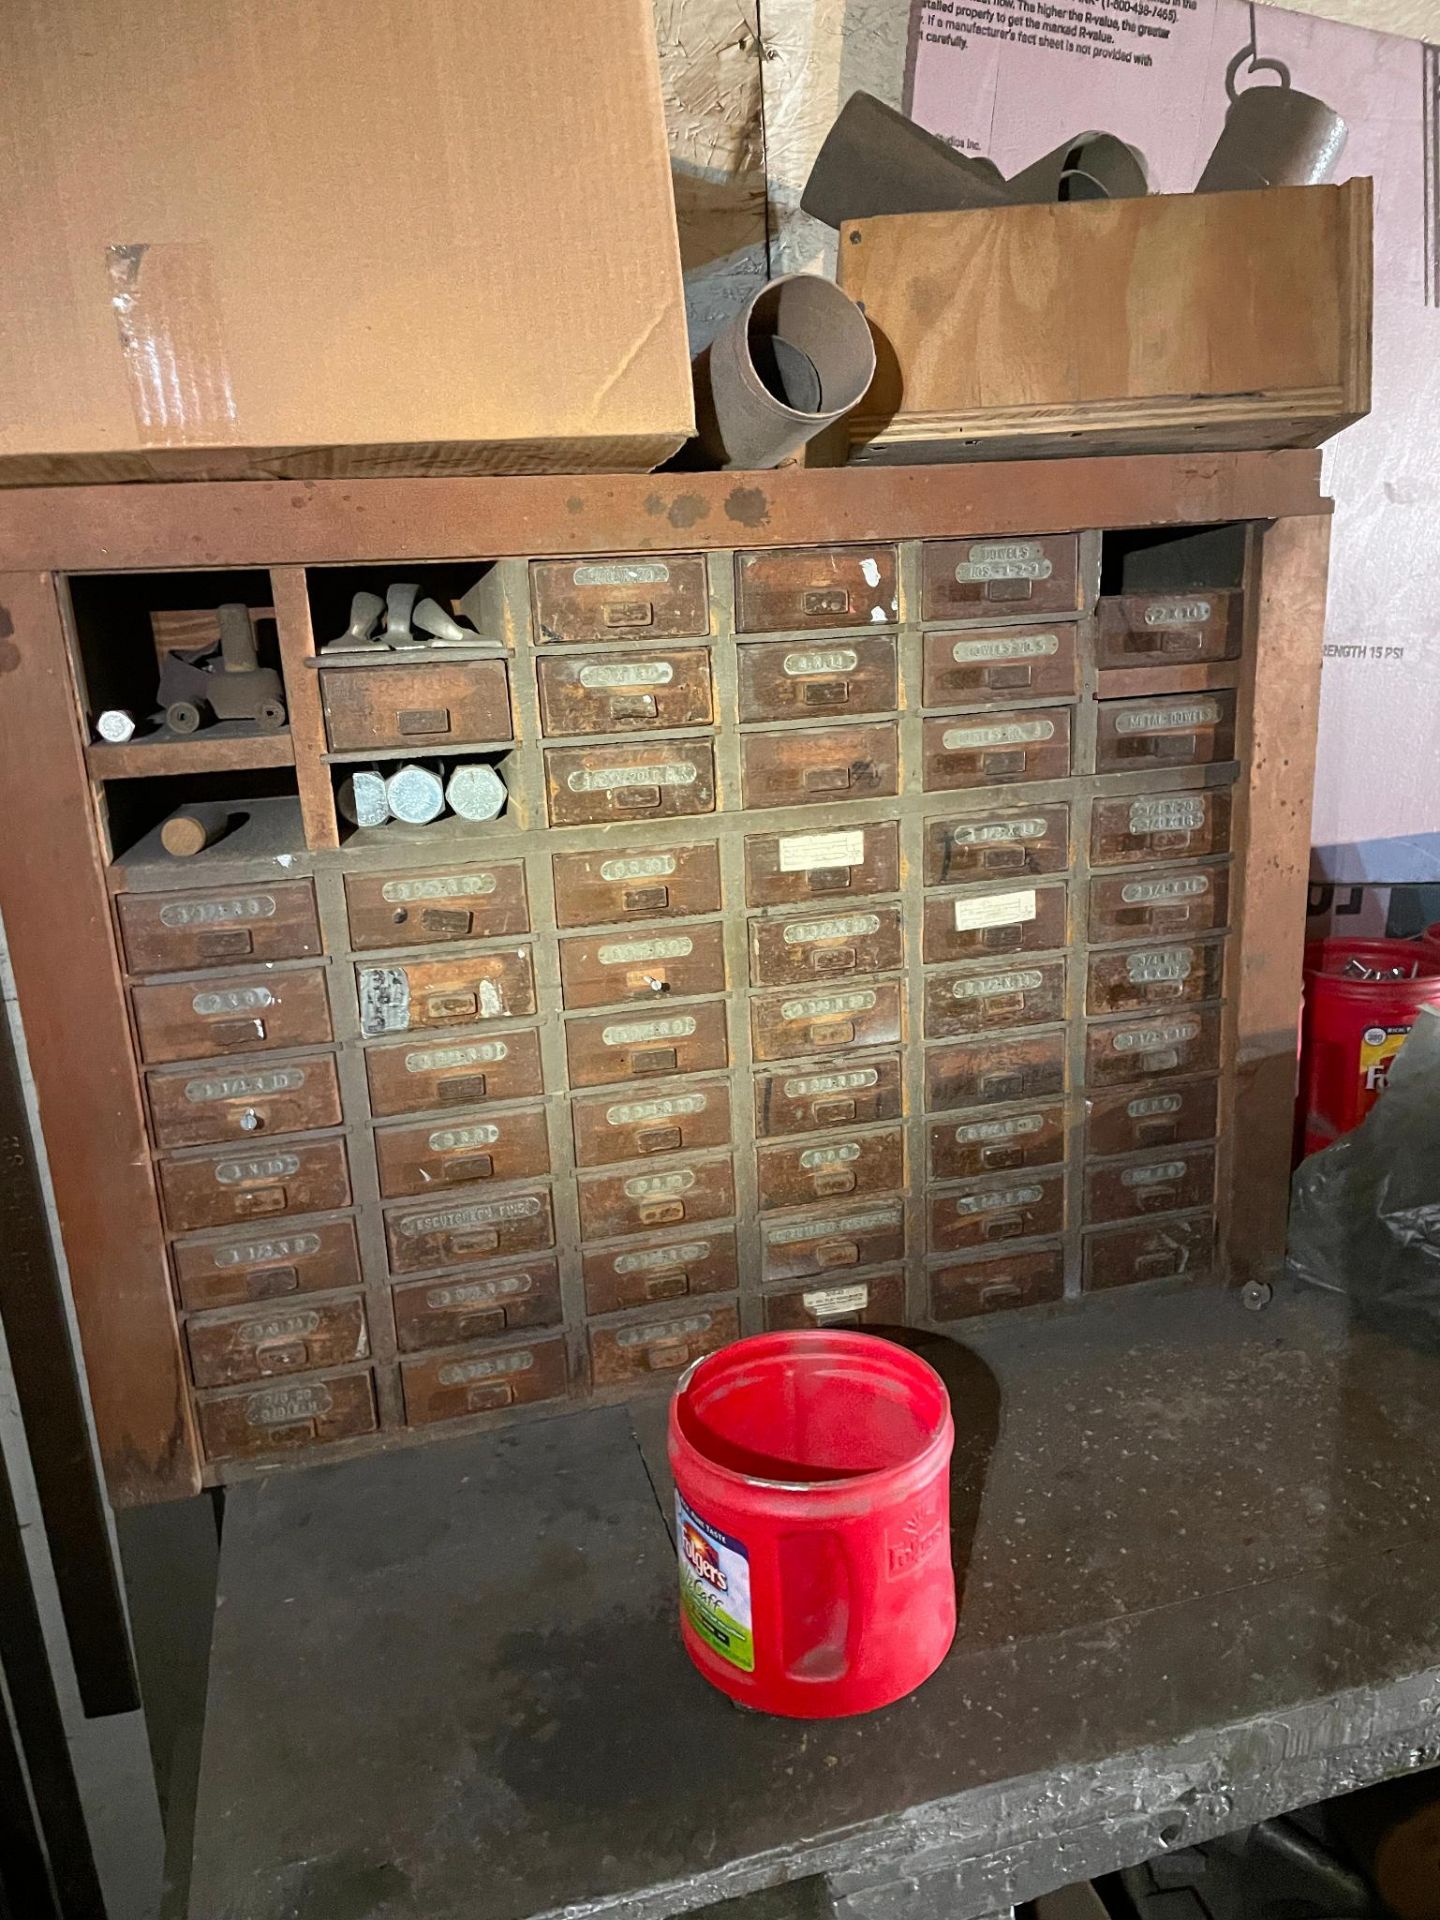 LOT OF WORK BENCHES & CABINETS, w/ contents: bar clamps, eye bolts, wood screws, lag screws, - Image 8 of 11